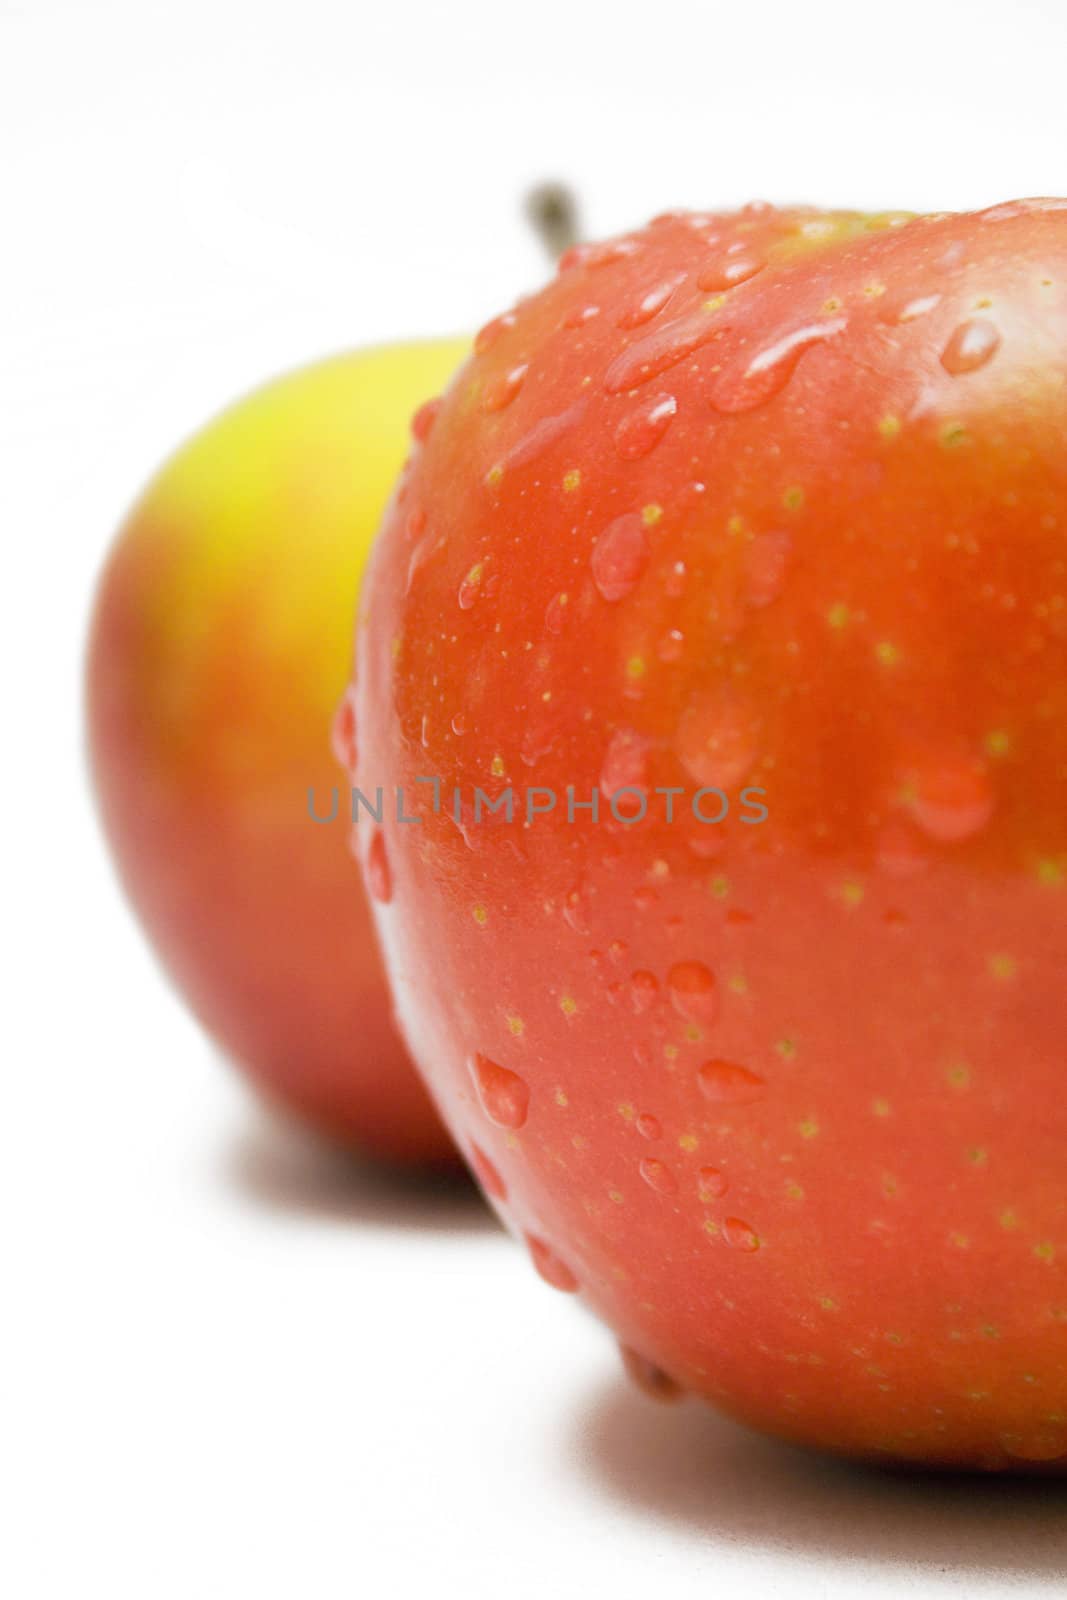 Apples with raindrops isolated on a white background.